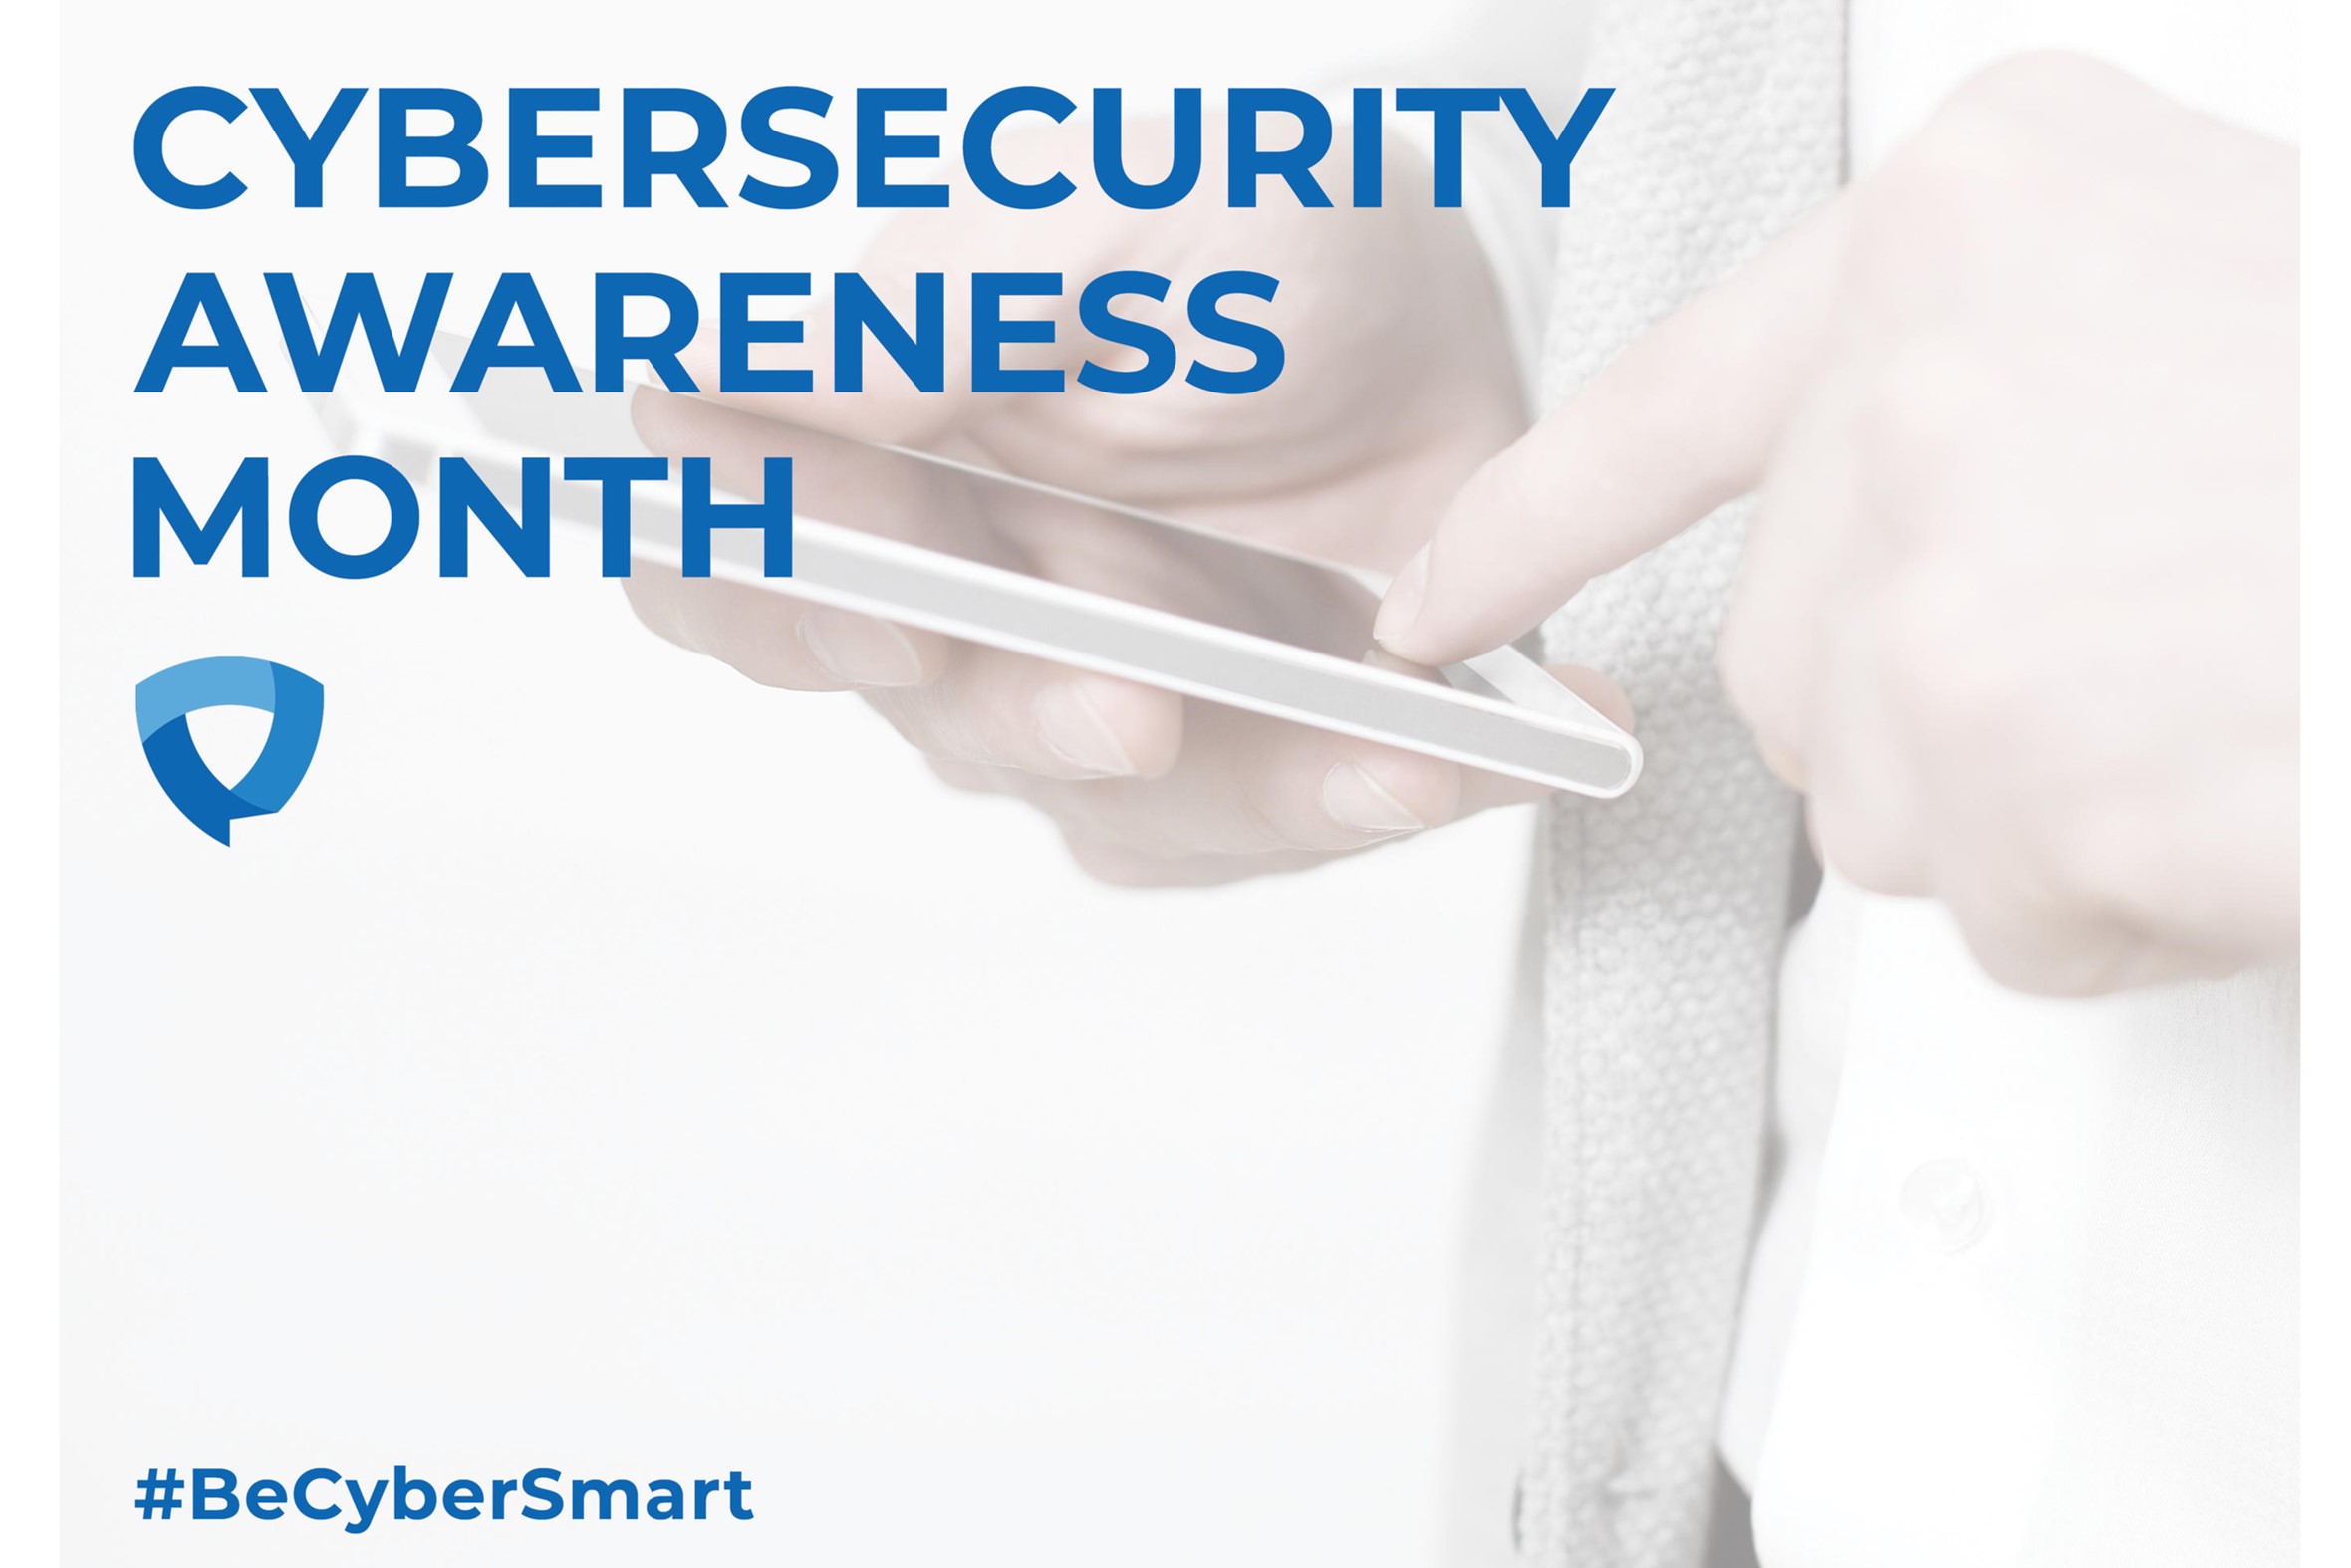 Click the caption for NIST information on Cybersecurity Awareness Month (October 2022).